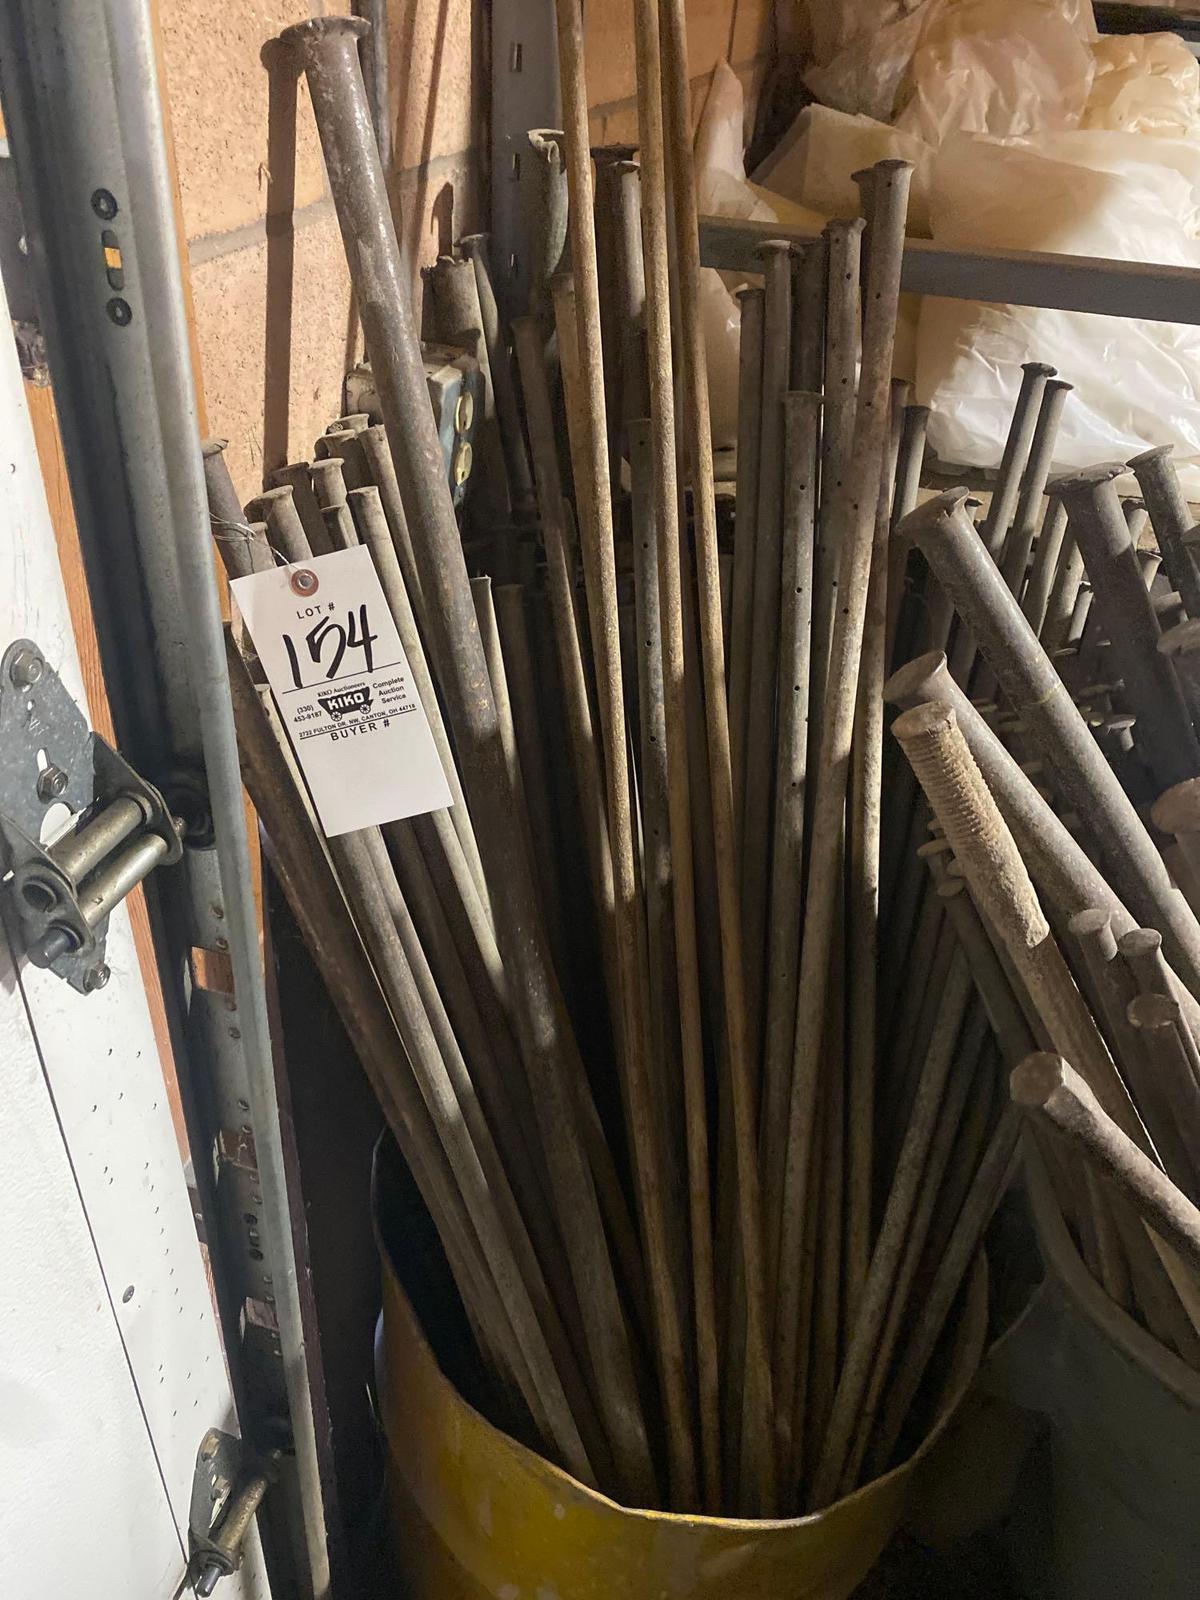 Assorted Form and Curb Stakes